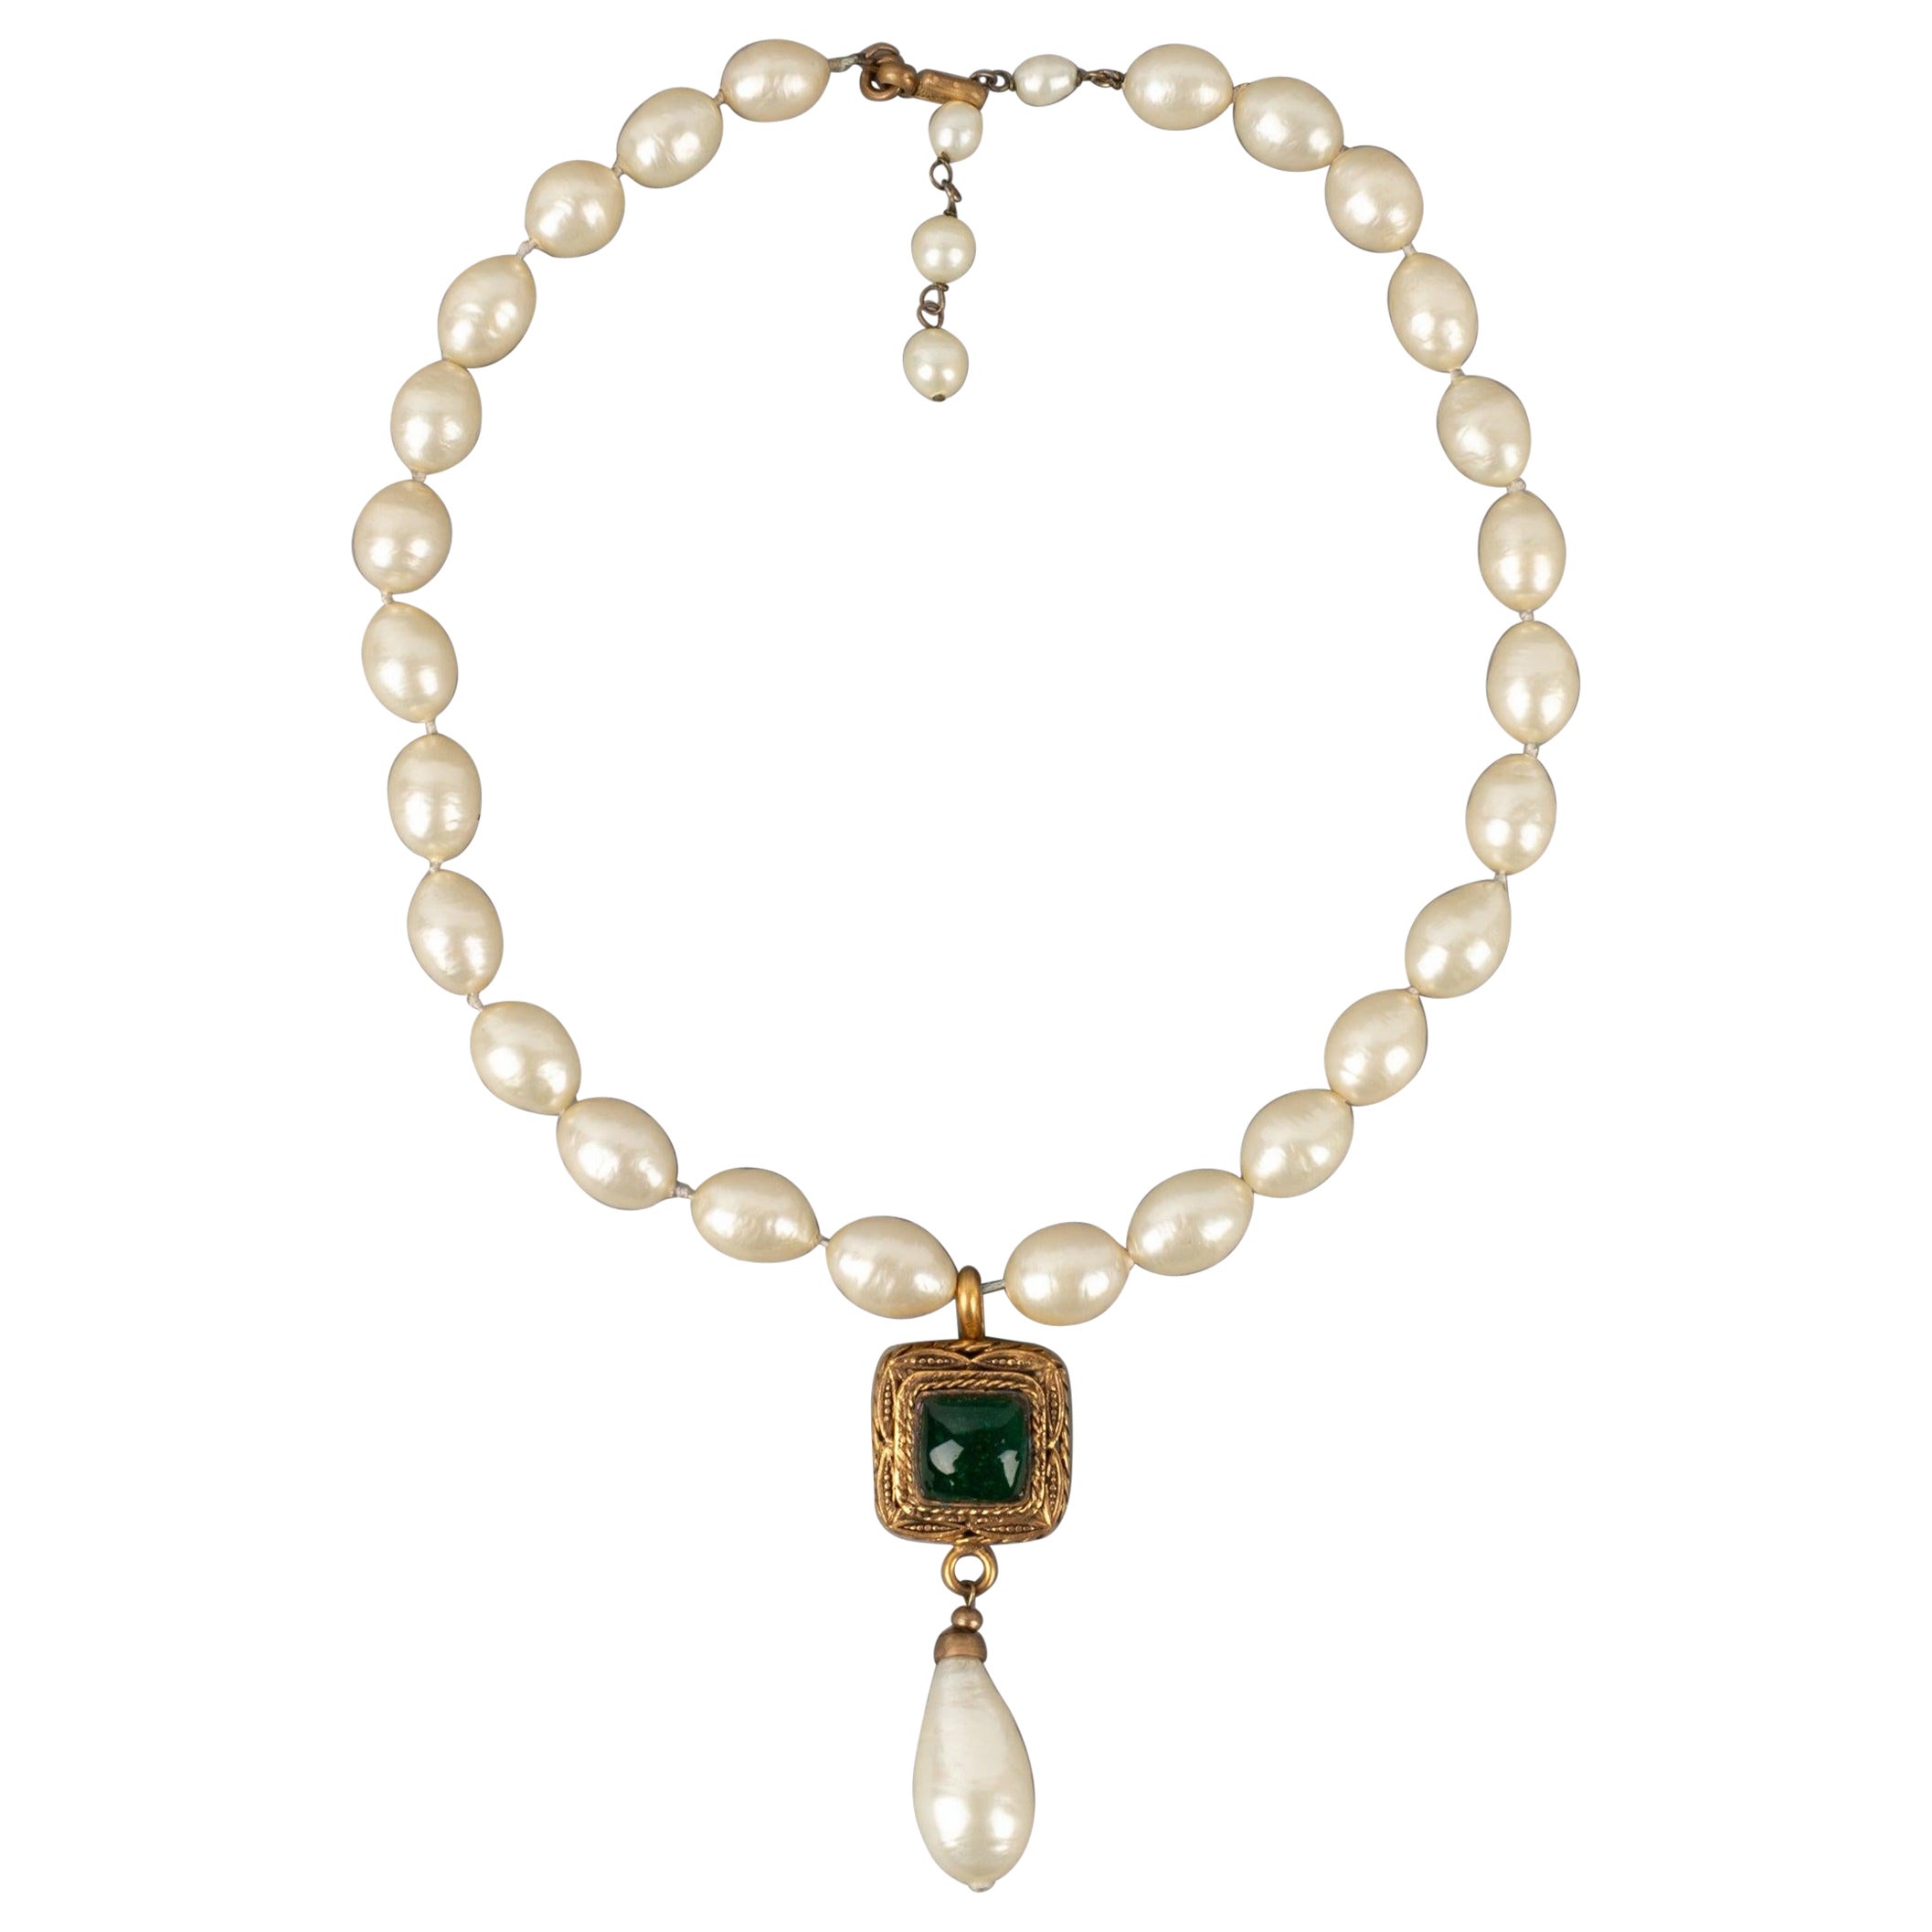 Chanel Costume Pearl Necklace with a Golden Metal Pendant, 1983